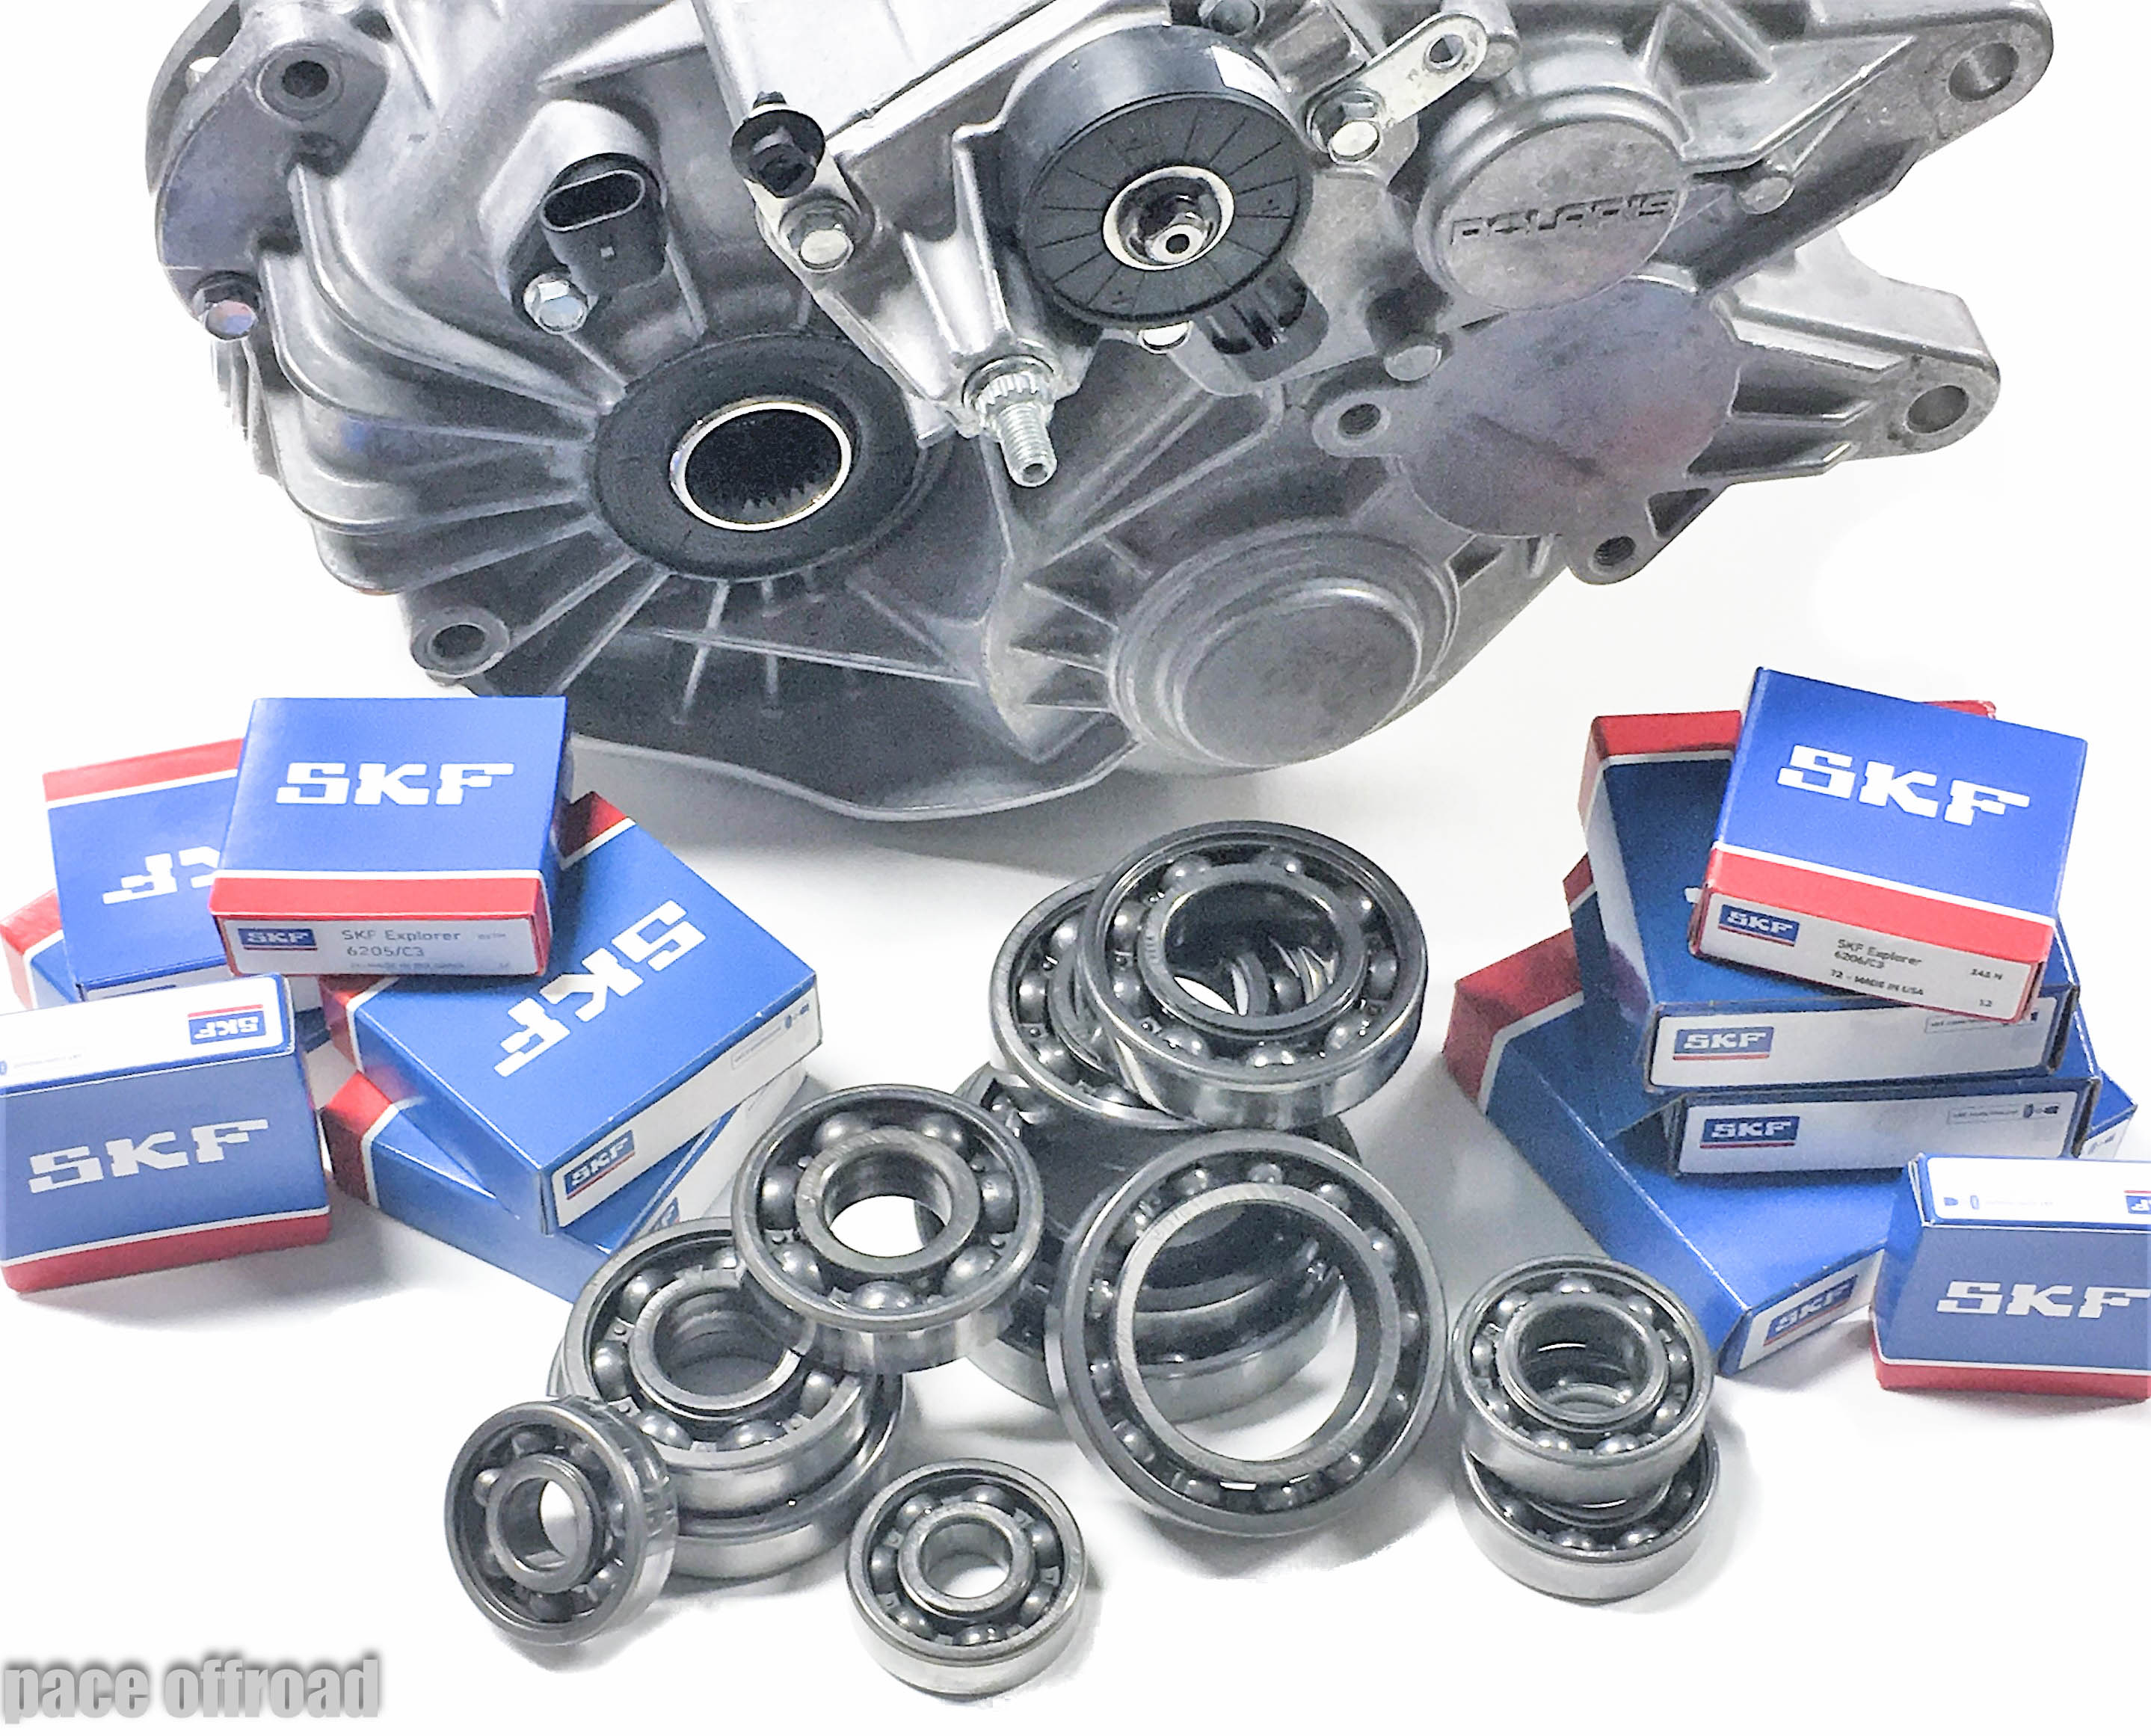 RZR 4 XP JAGGED X 2013 RZR RS1 2018-2019 RZR XP 1000 2014-2019 New All Balls 21-0019 Shock Bearing Kit Compatible with/Replacement For Polaris RZR 4 XP 900 2012-2014 